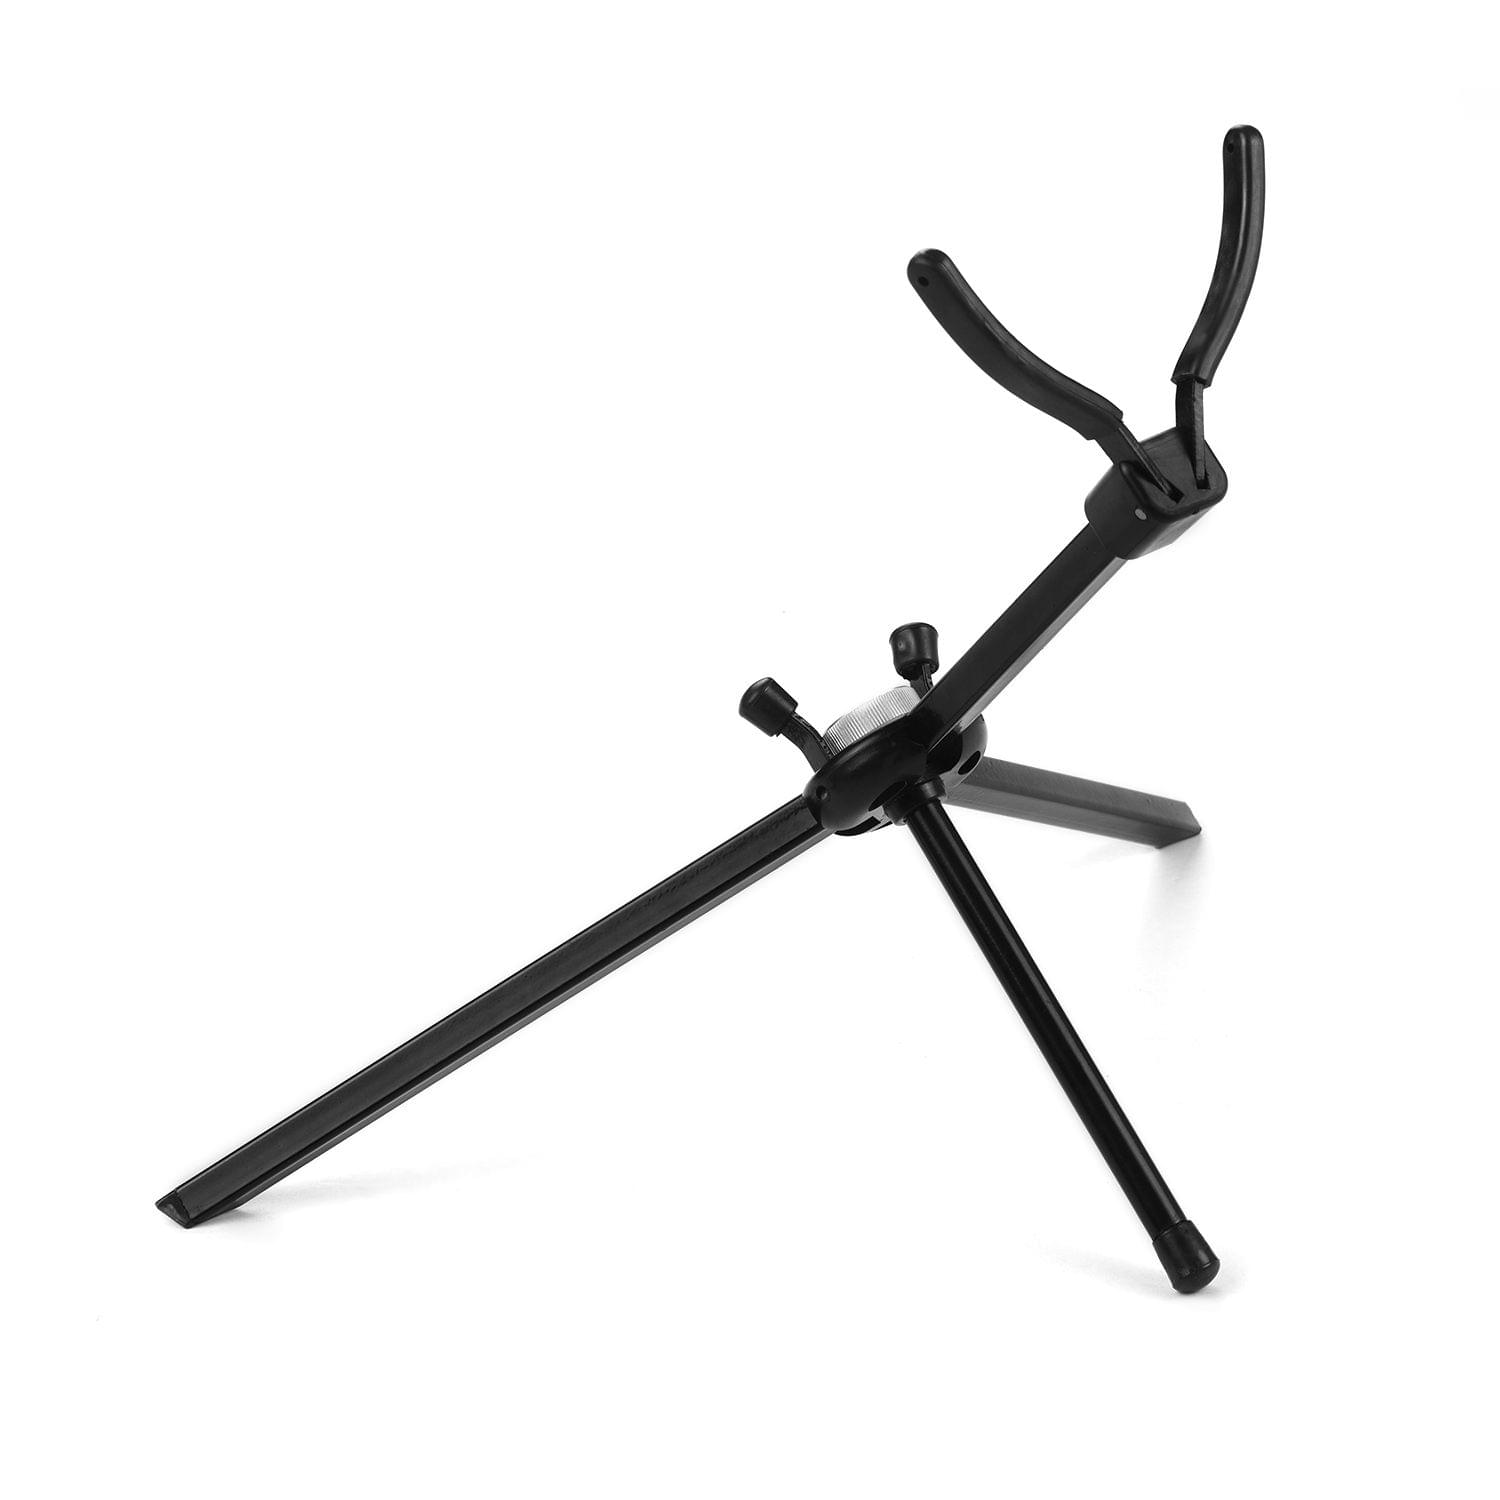 Portable Tenor Saxophone Stand Sax Floor Stand Holder - for tenor sax